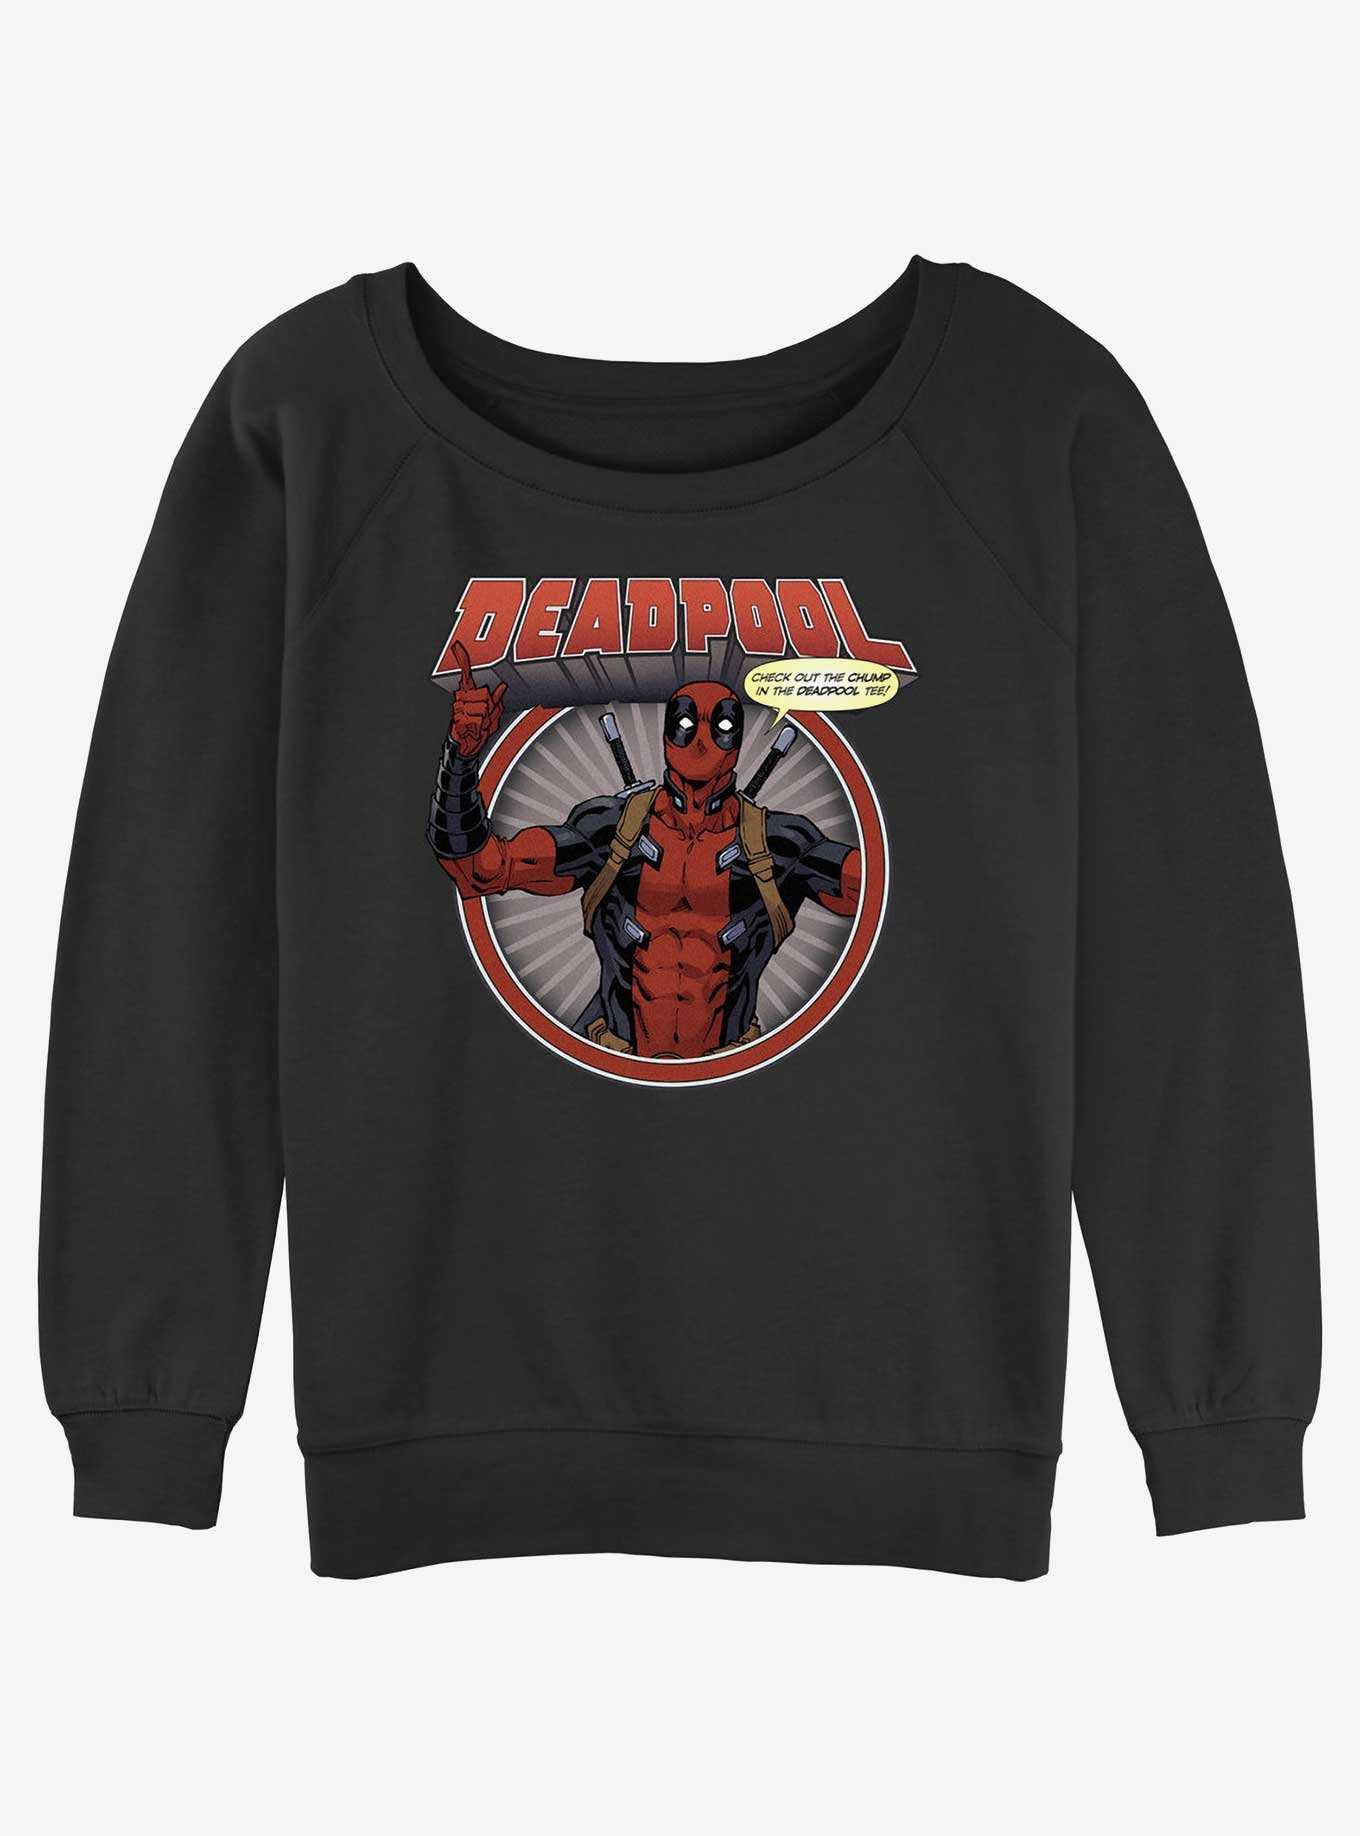 Marvel Deadpool Check Out The Chump Womens Slouchy Sweatshirt, , hi-res